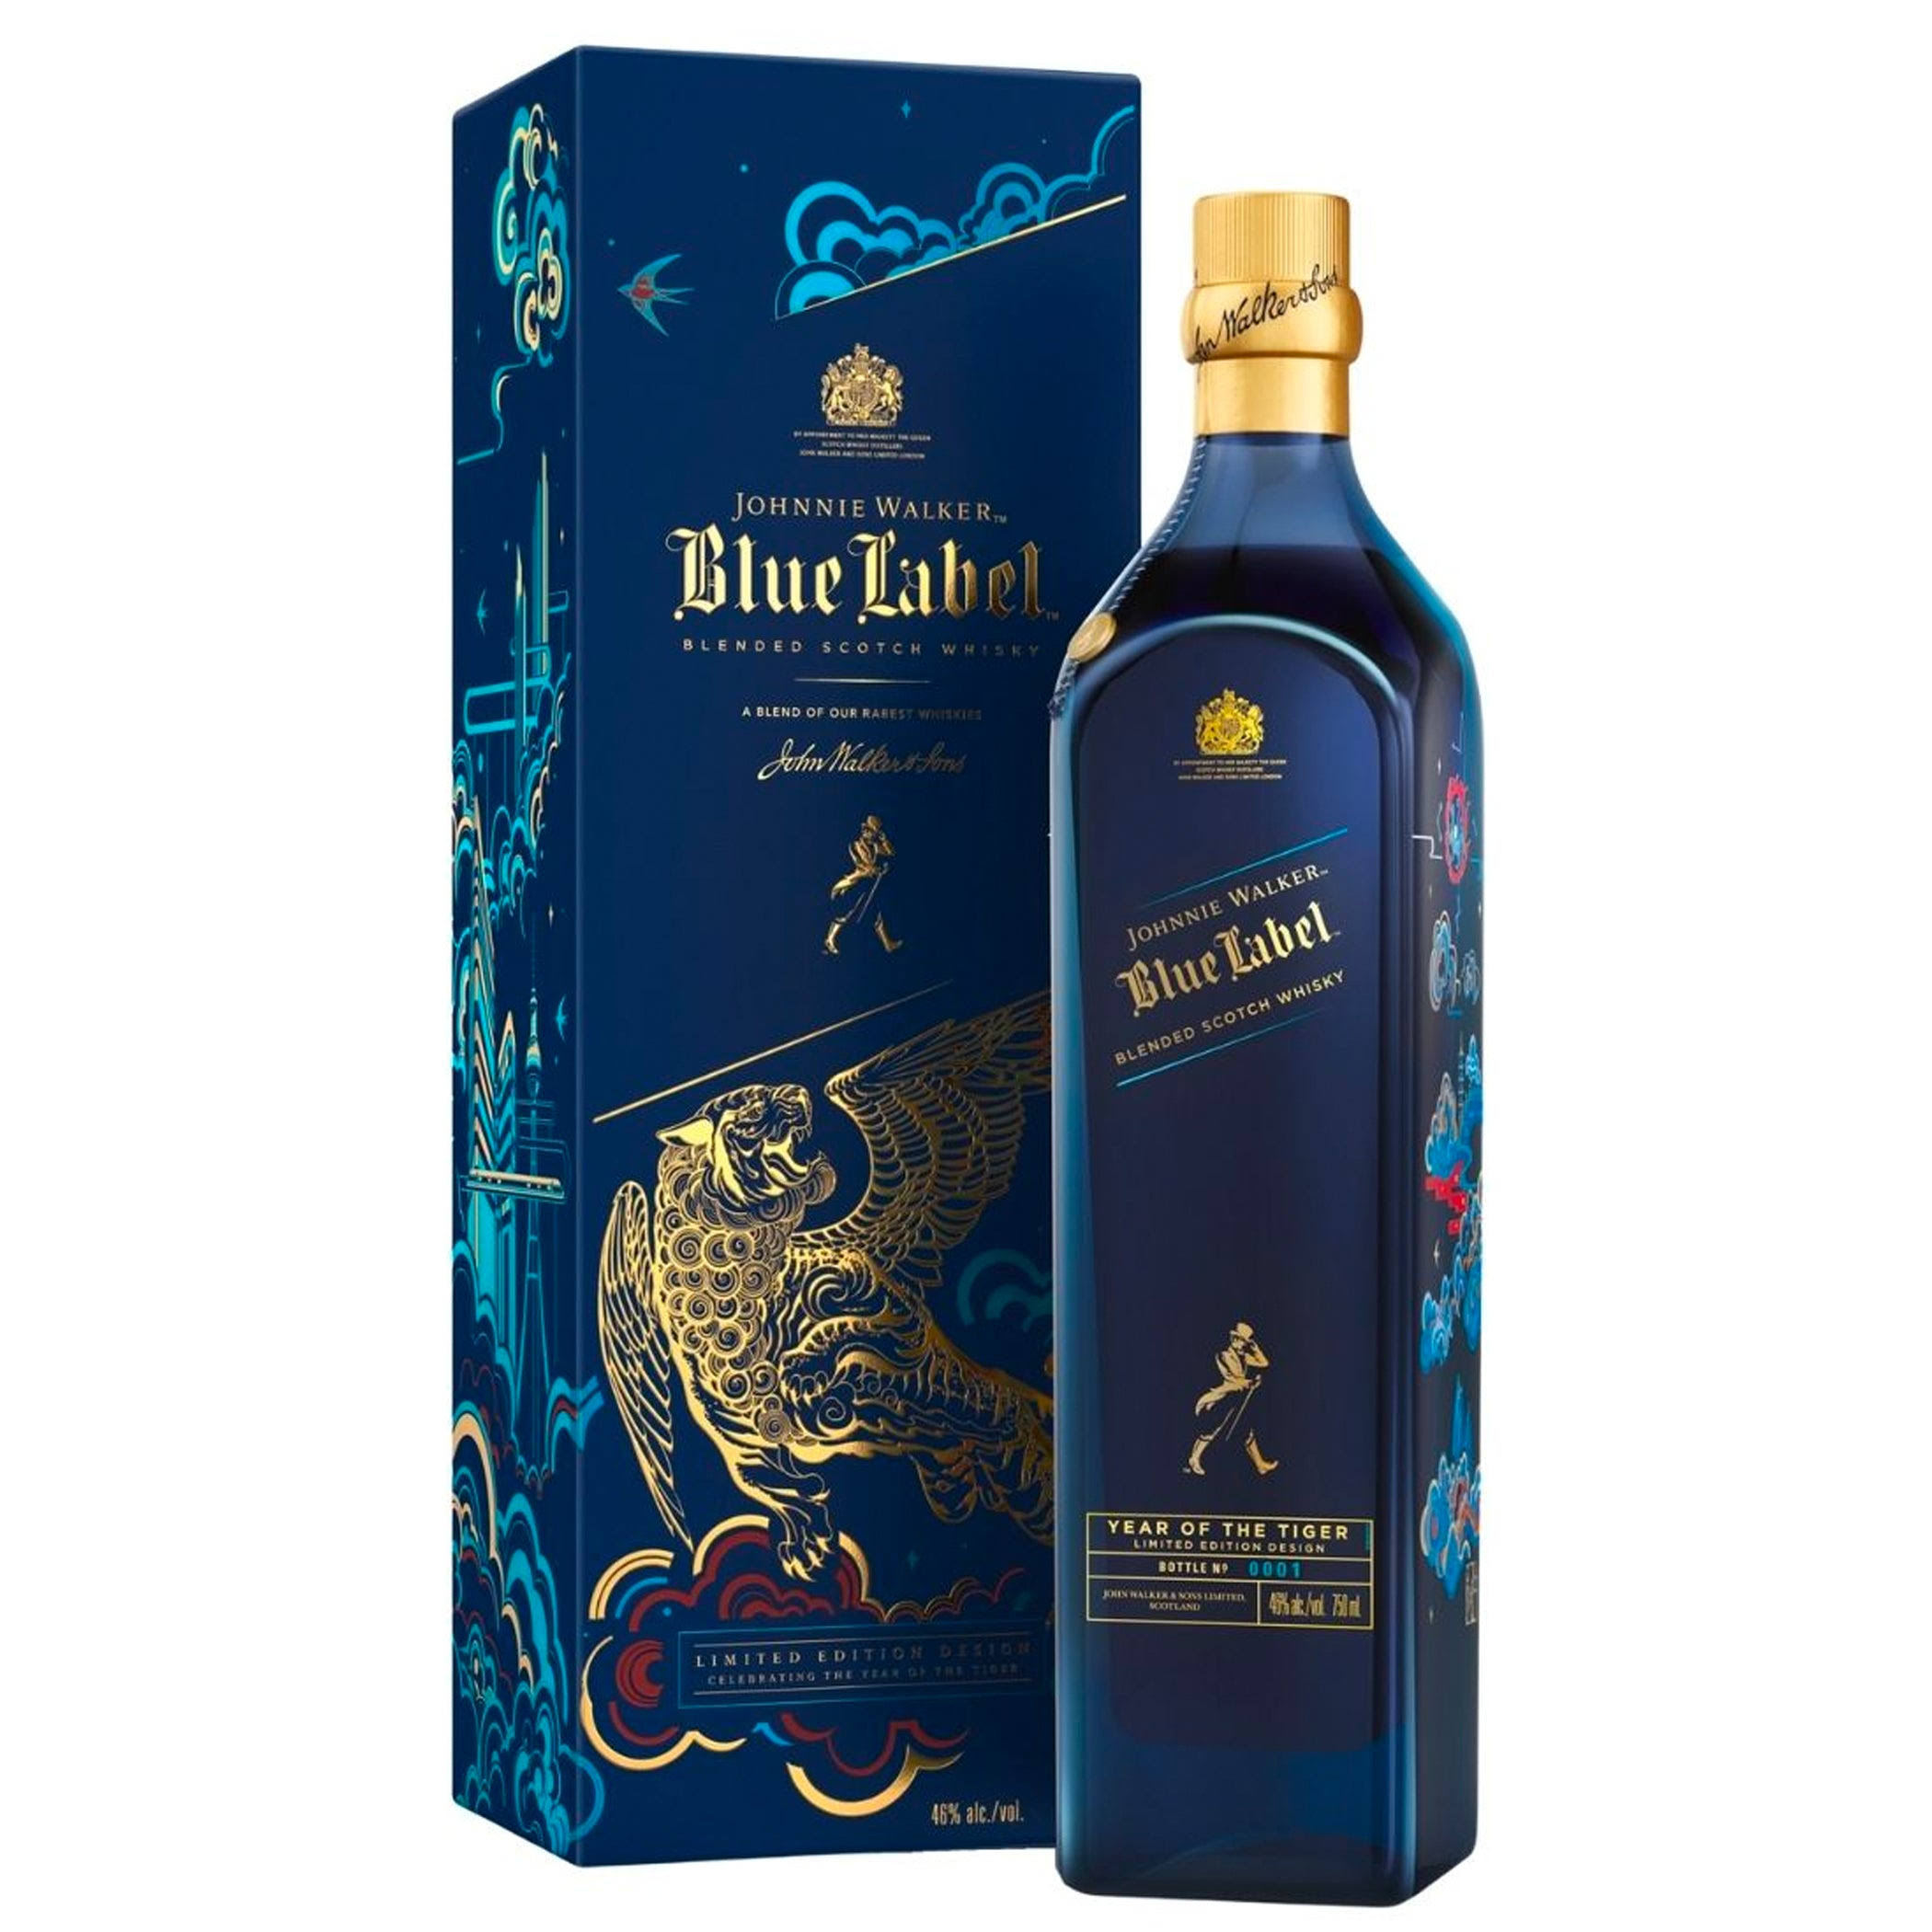 Johnnie Walker Blue Label Chinese Year of The Tiger 2022 Limited Edition Blended Scotch Whisky